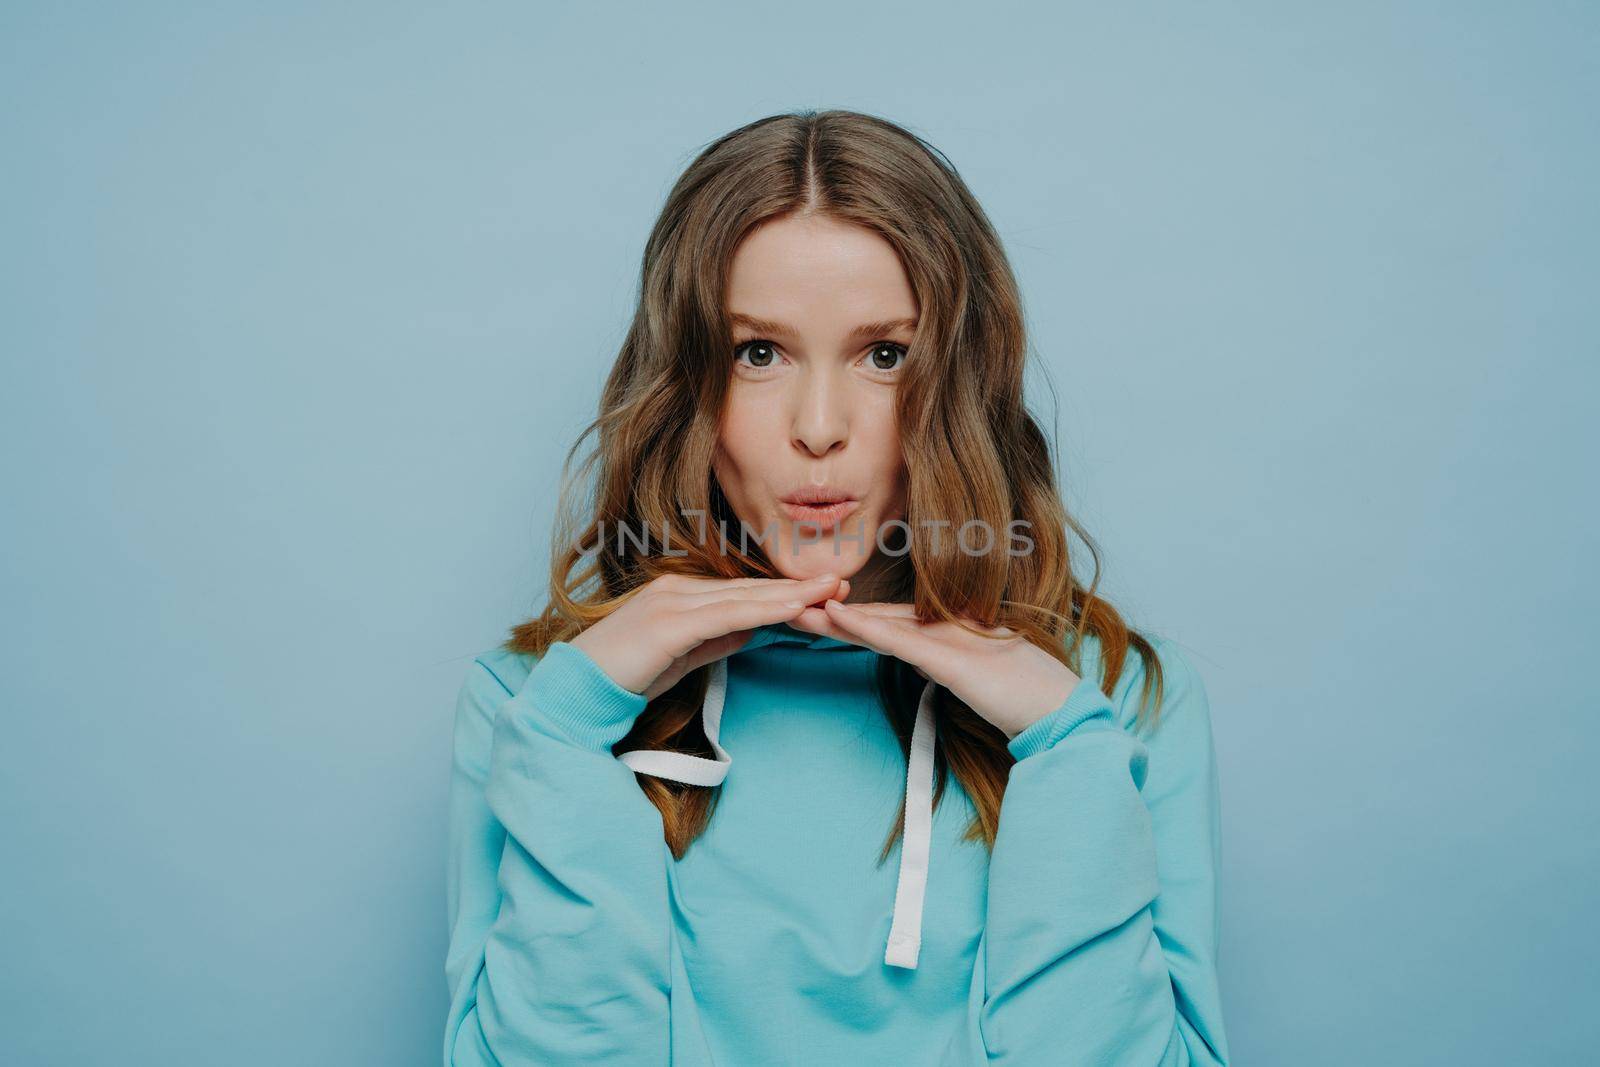 Pretty young teenage girl with wavy brown hair and widely open dark eyes touching her chin with fingertips expressing amusement standing on light blue background. Human emotions concept